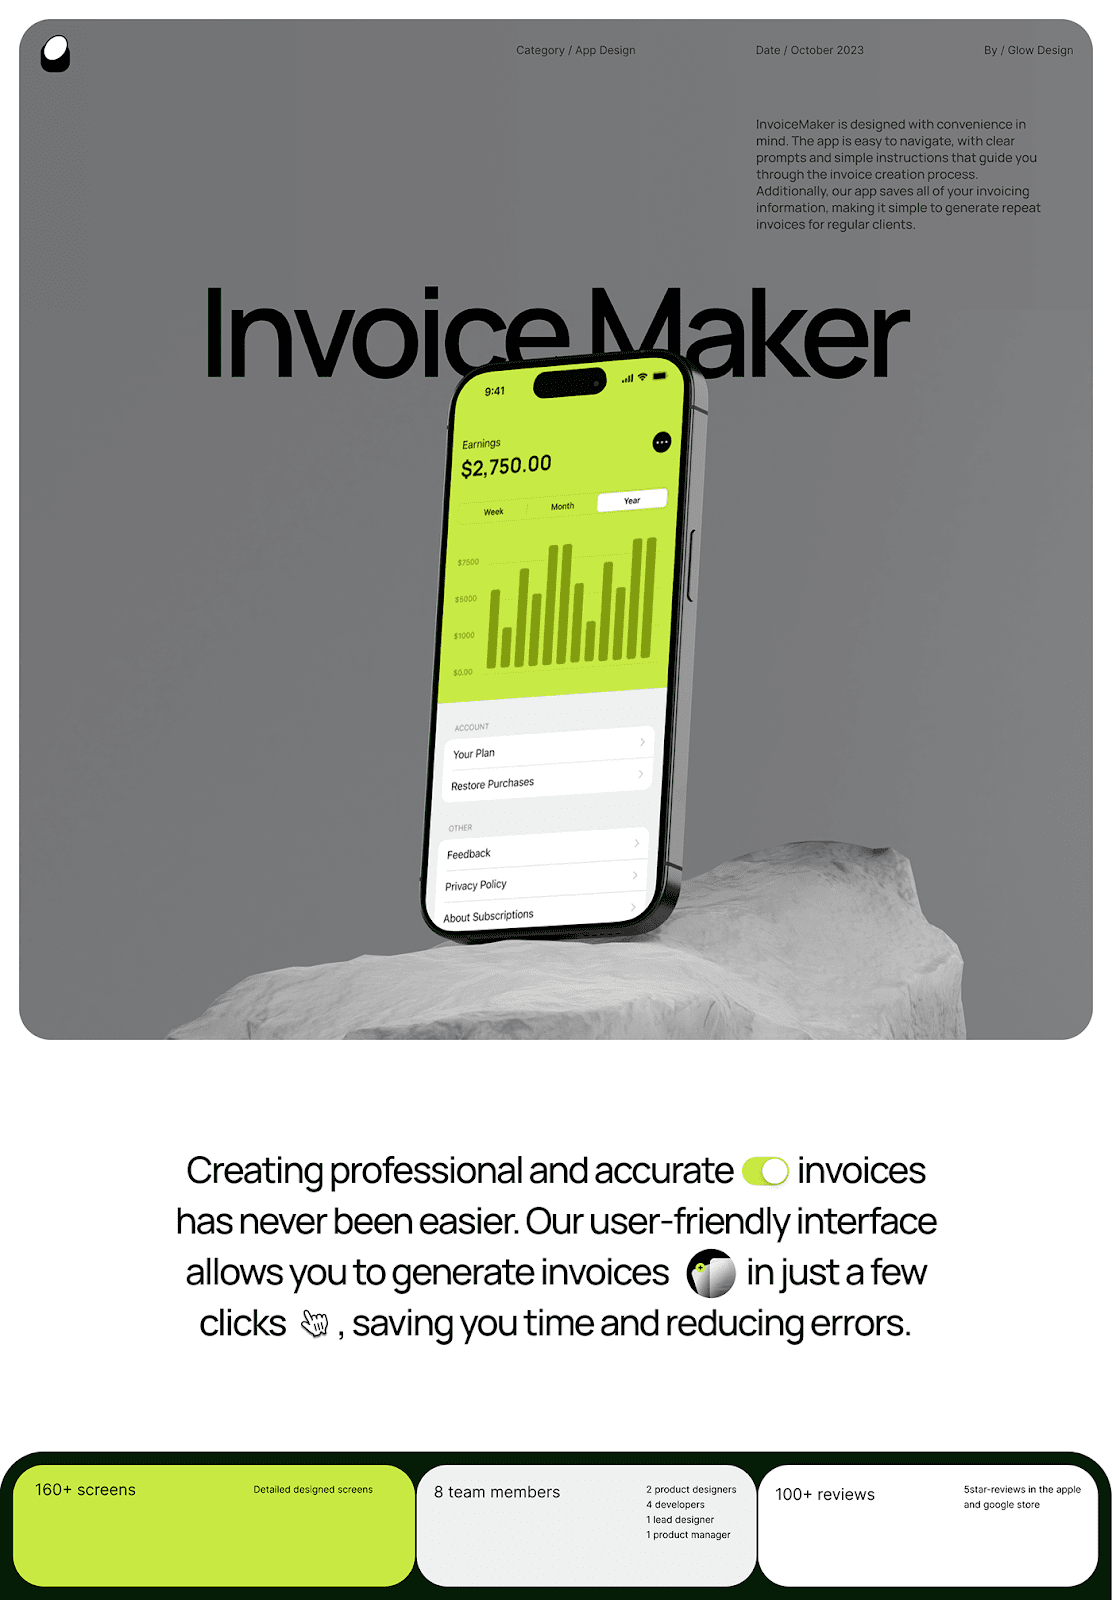 Artifact from the  Seamless Invoicing with InvoiceMaker App: A UI/UX Design Study article on Abduzeedo